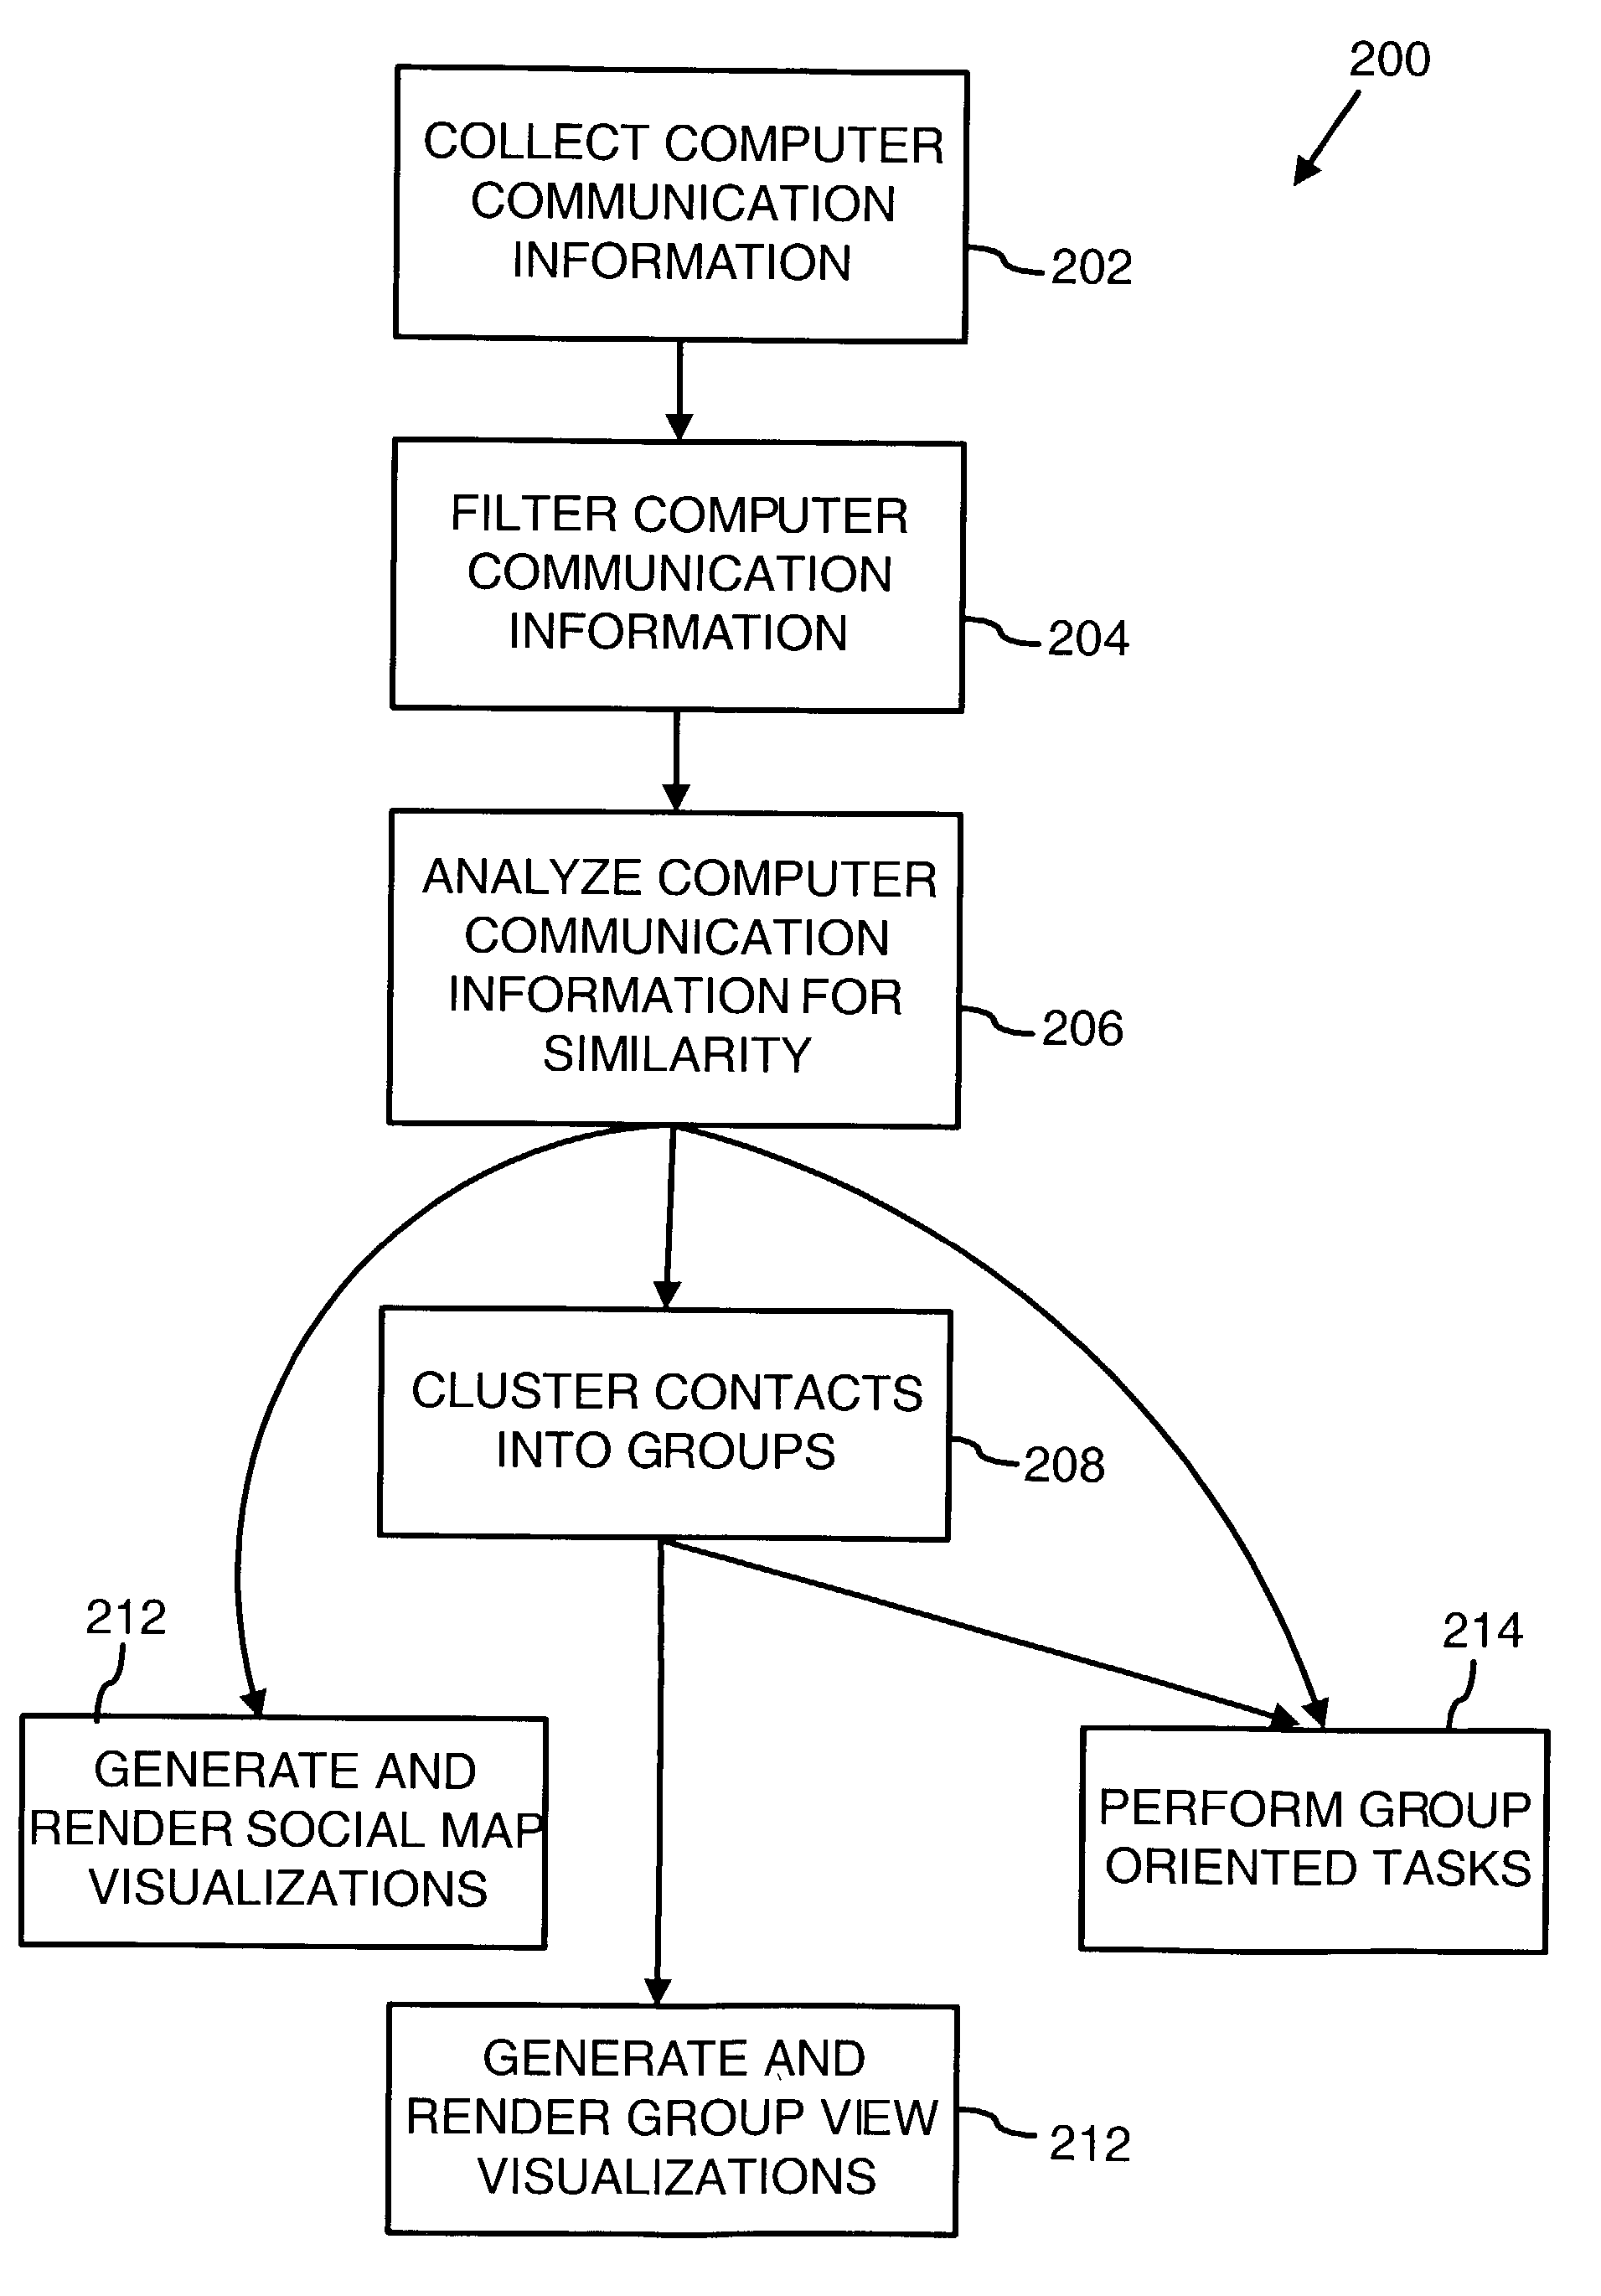 Social mapping of contacts from computer communication information